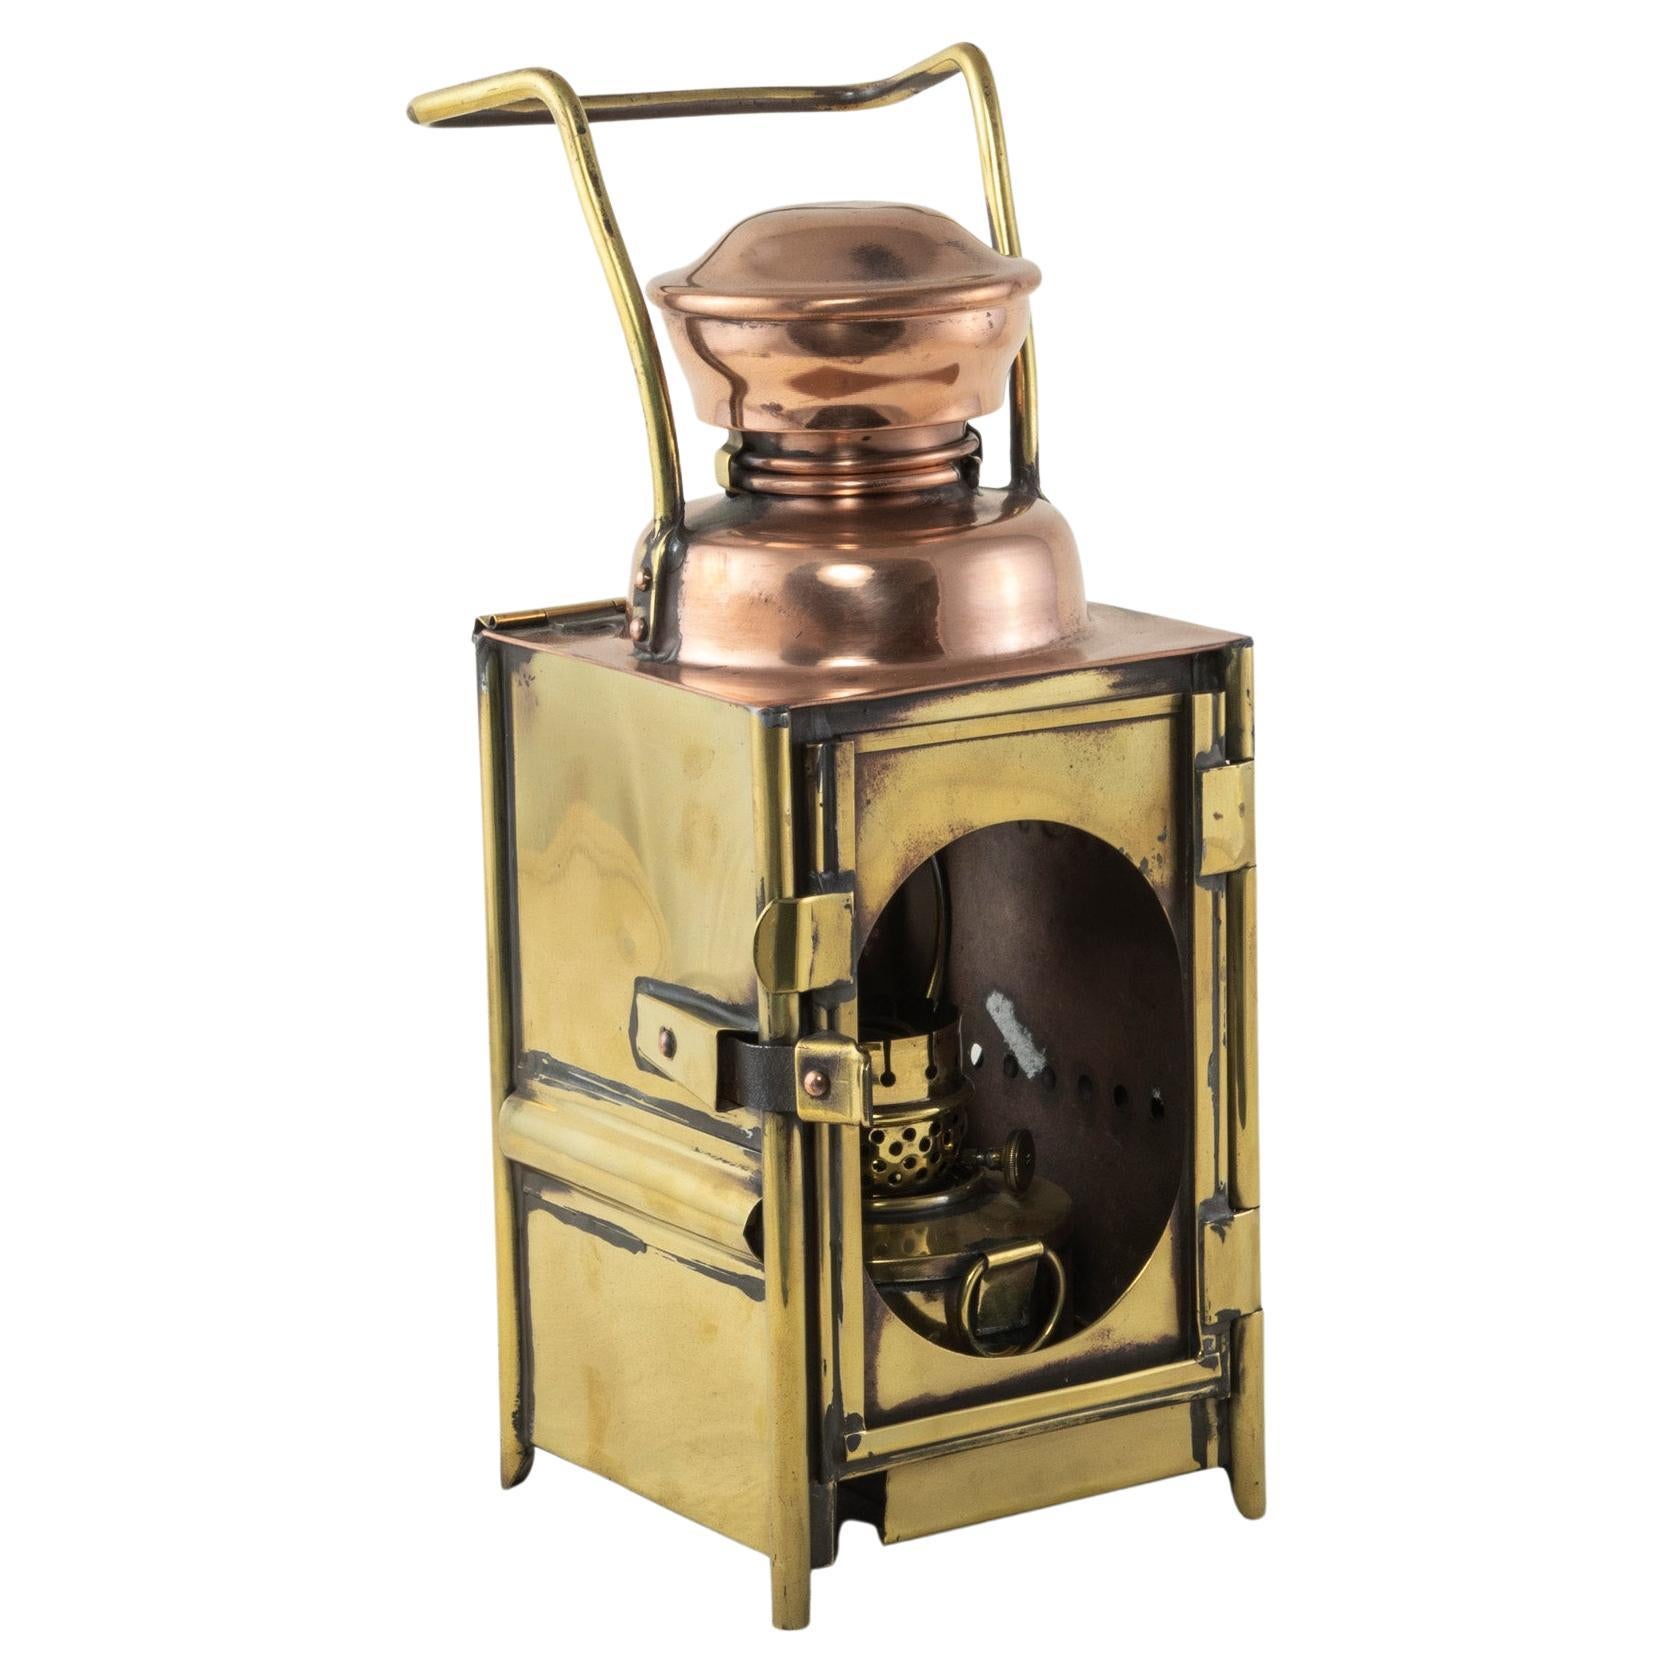 Early 20th Century French Brass and Copper SNCF Railroad Switchman's Lantern